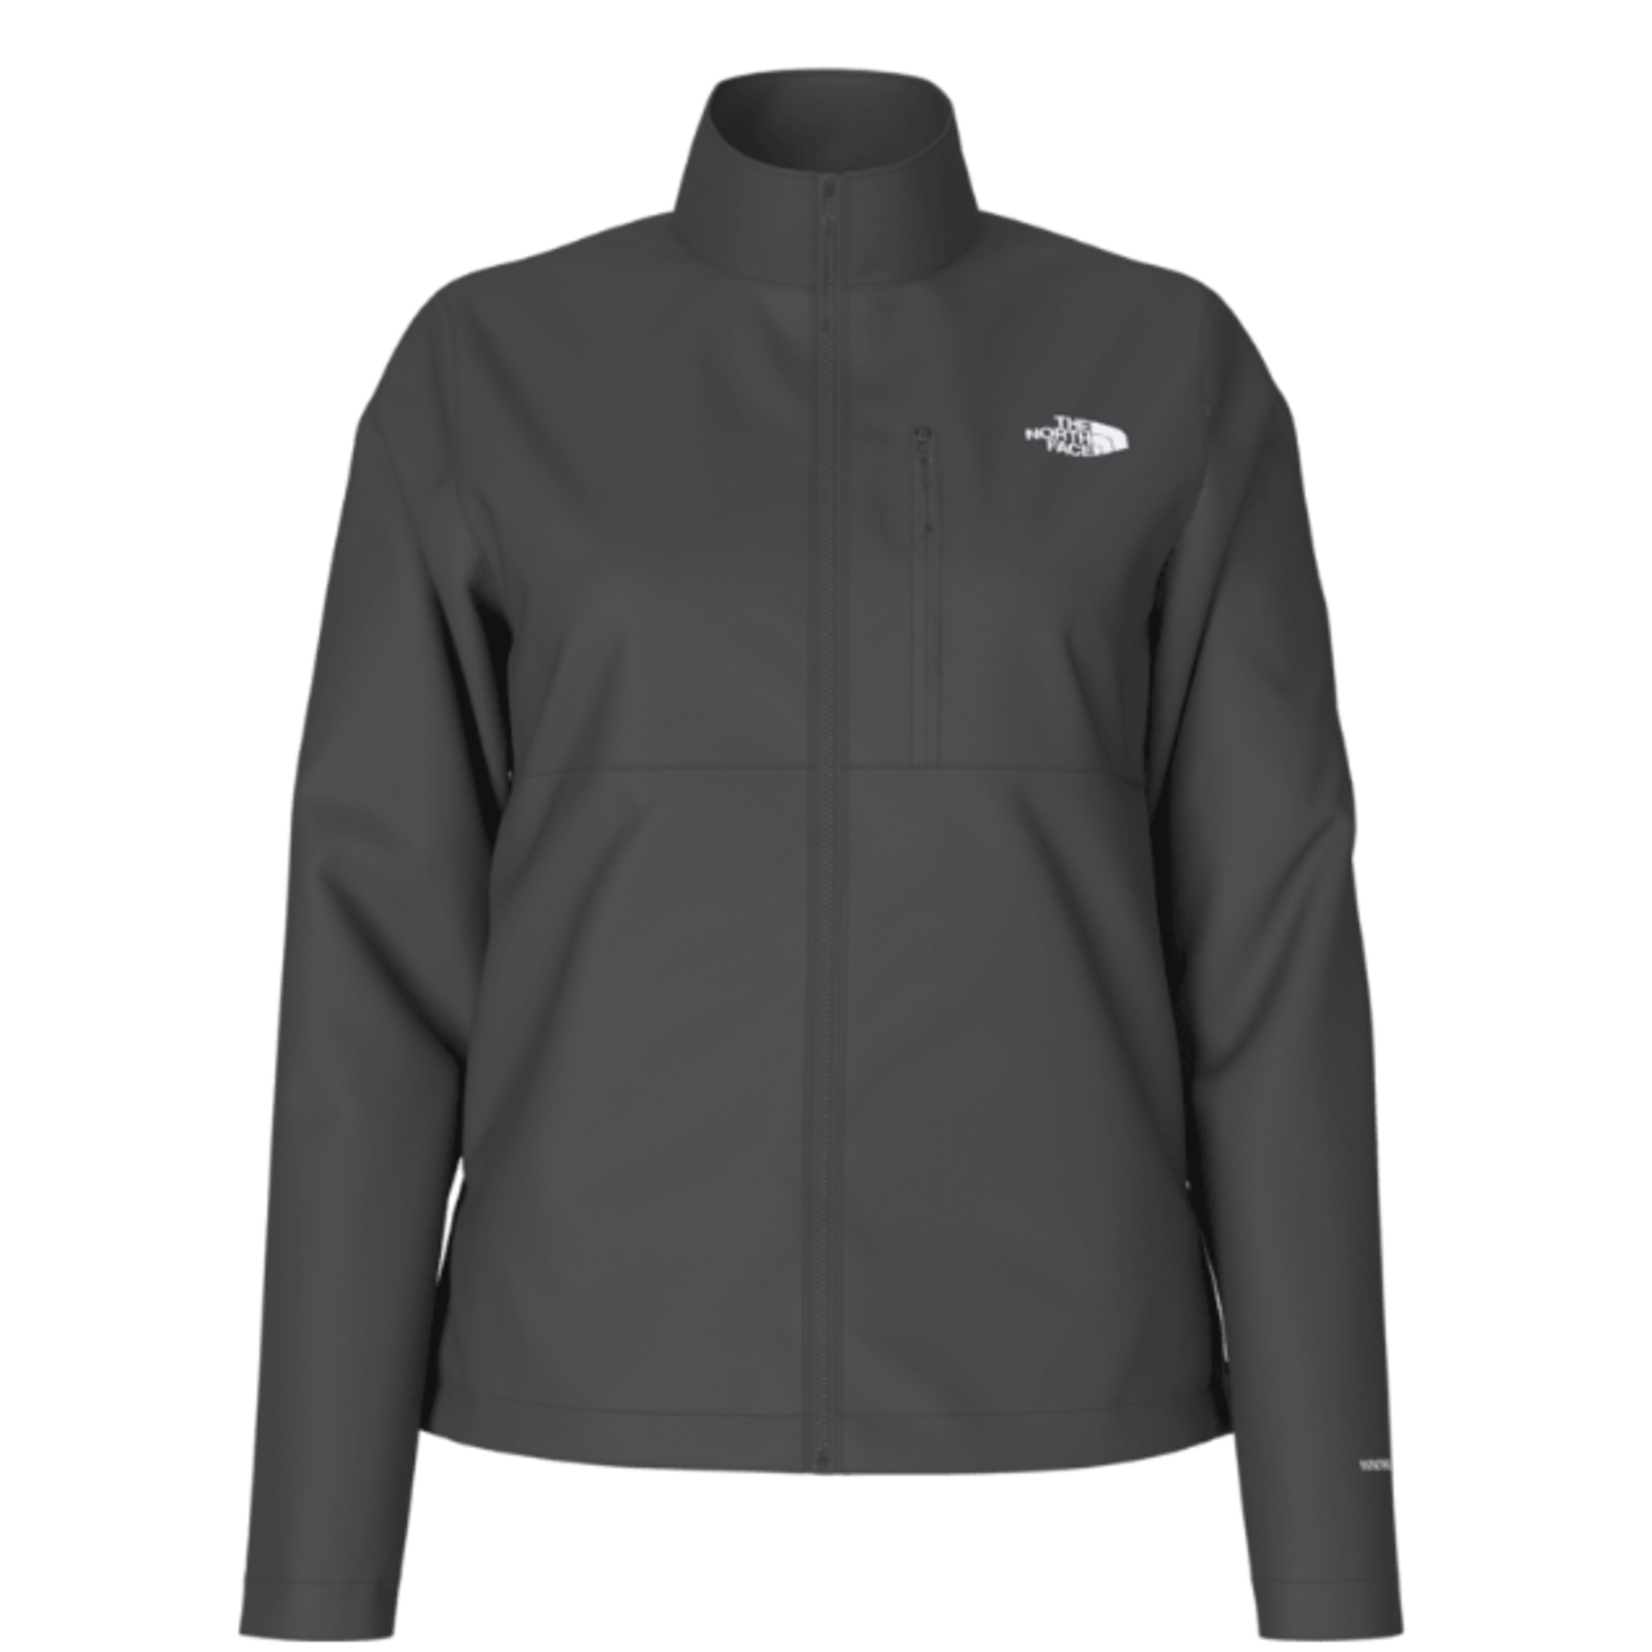 The North Face The North Face Jacket, Apex Bionic 3, Ladies